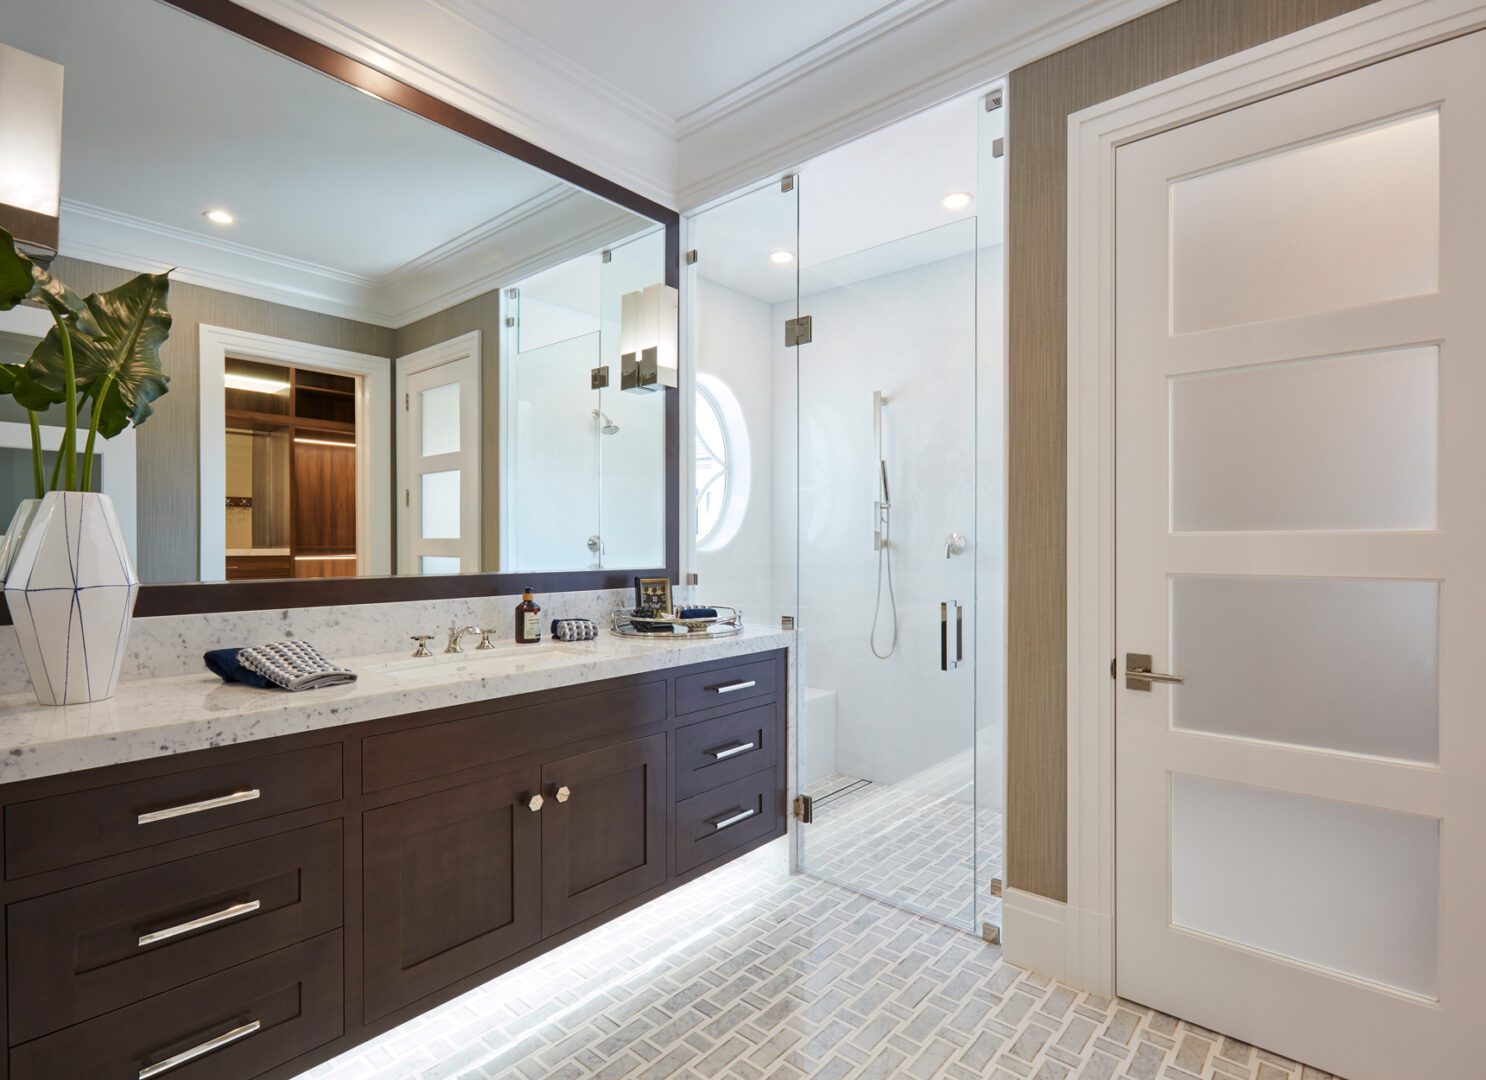 A bathroom with a large mirror and a white tile floor.